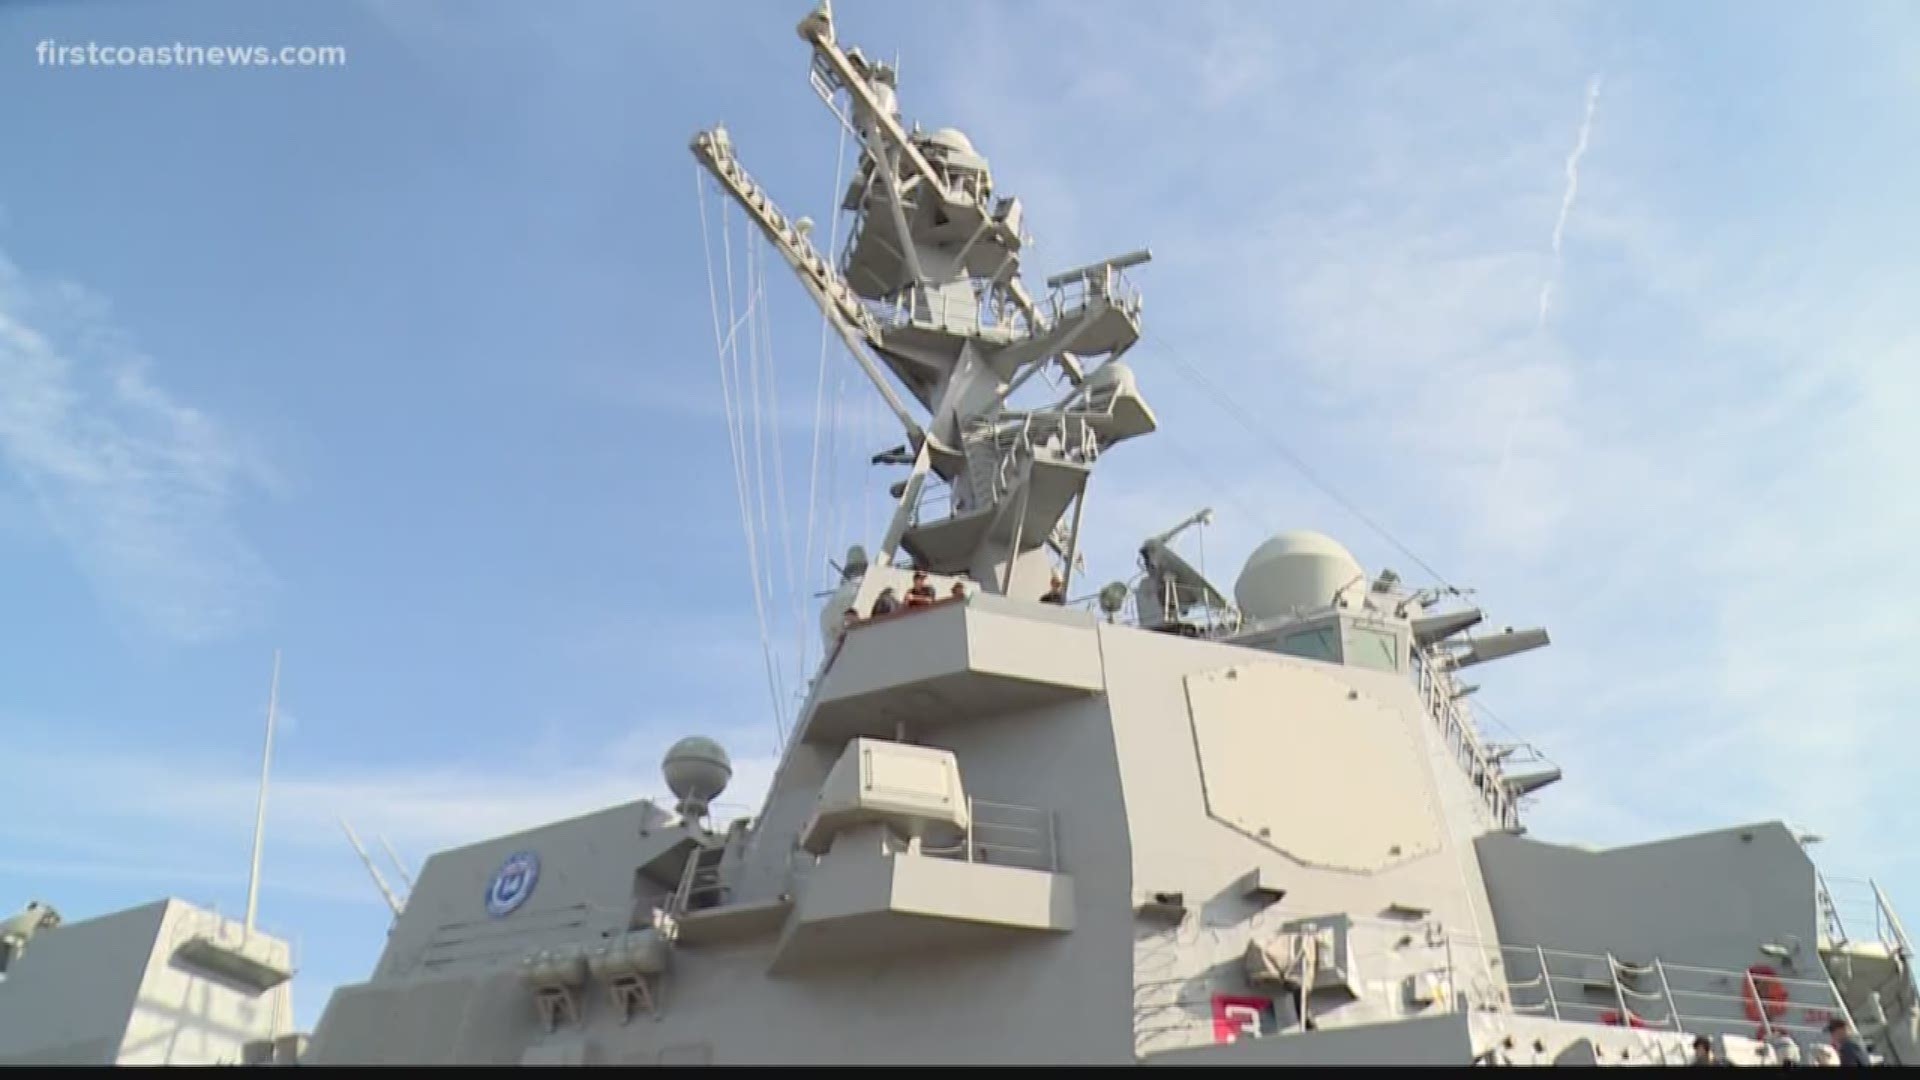 The Navy's newest destroyer is home on the First Coast.